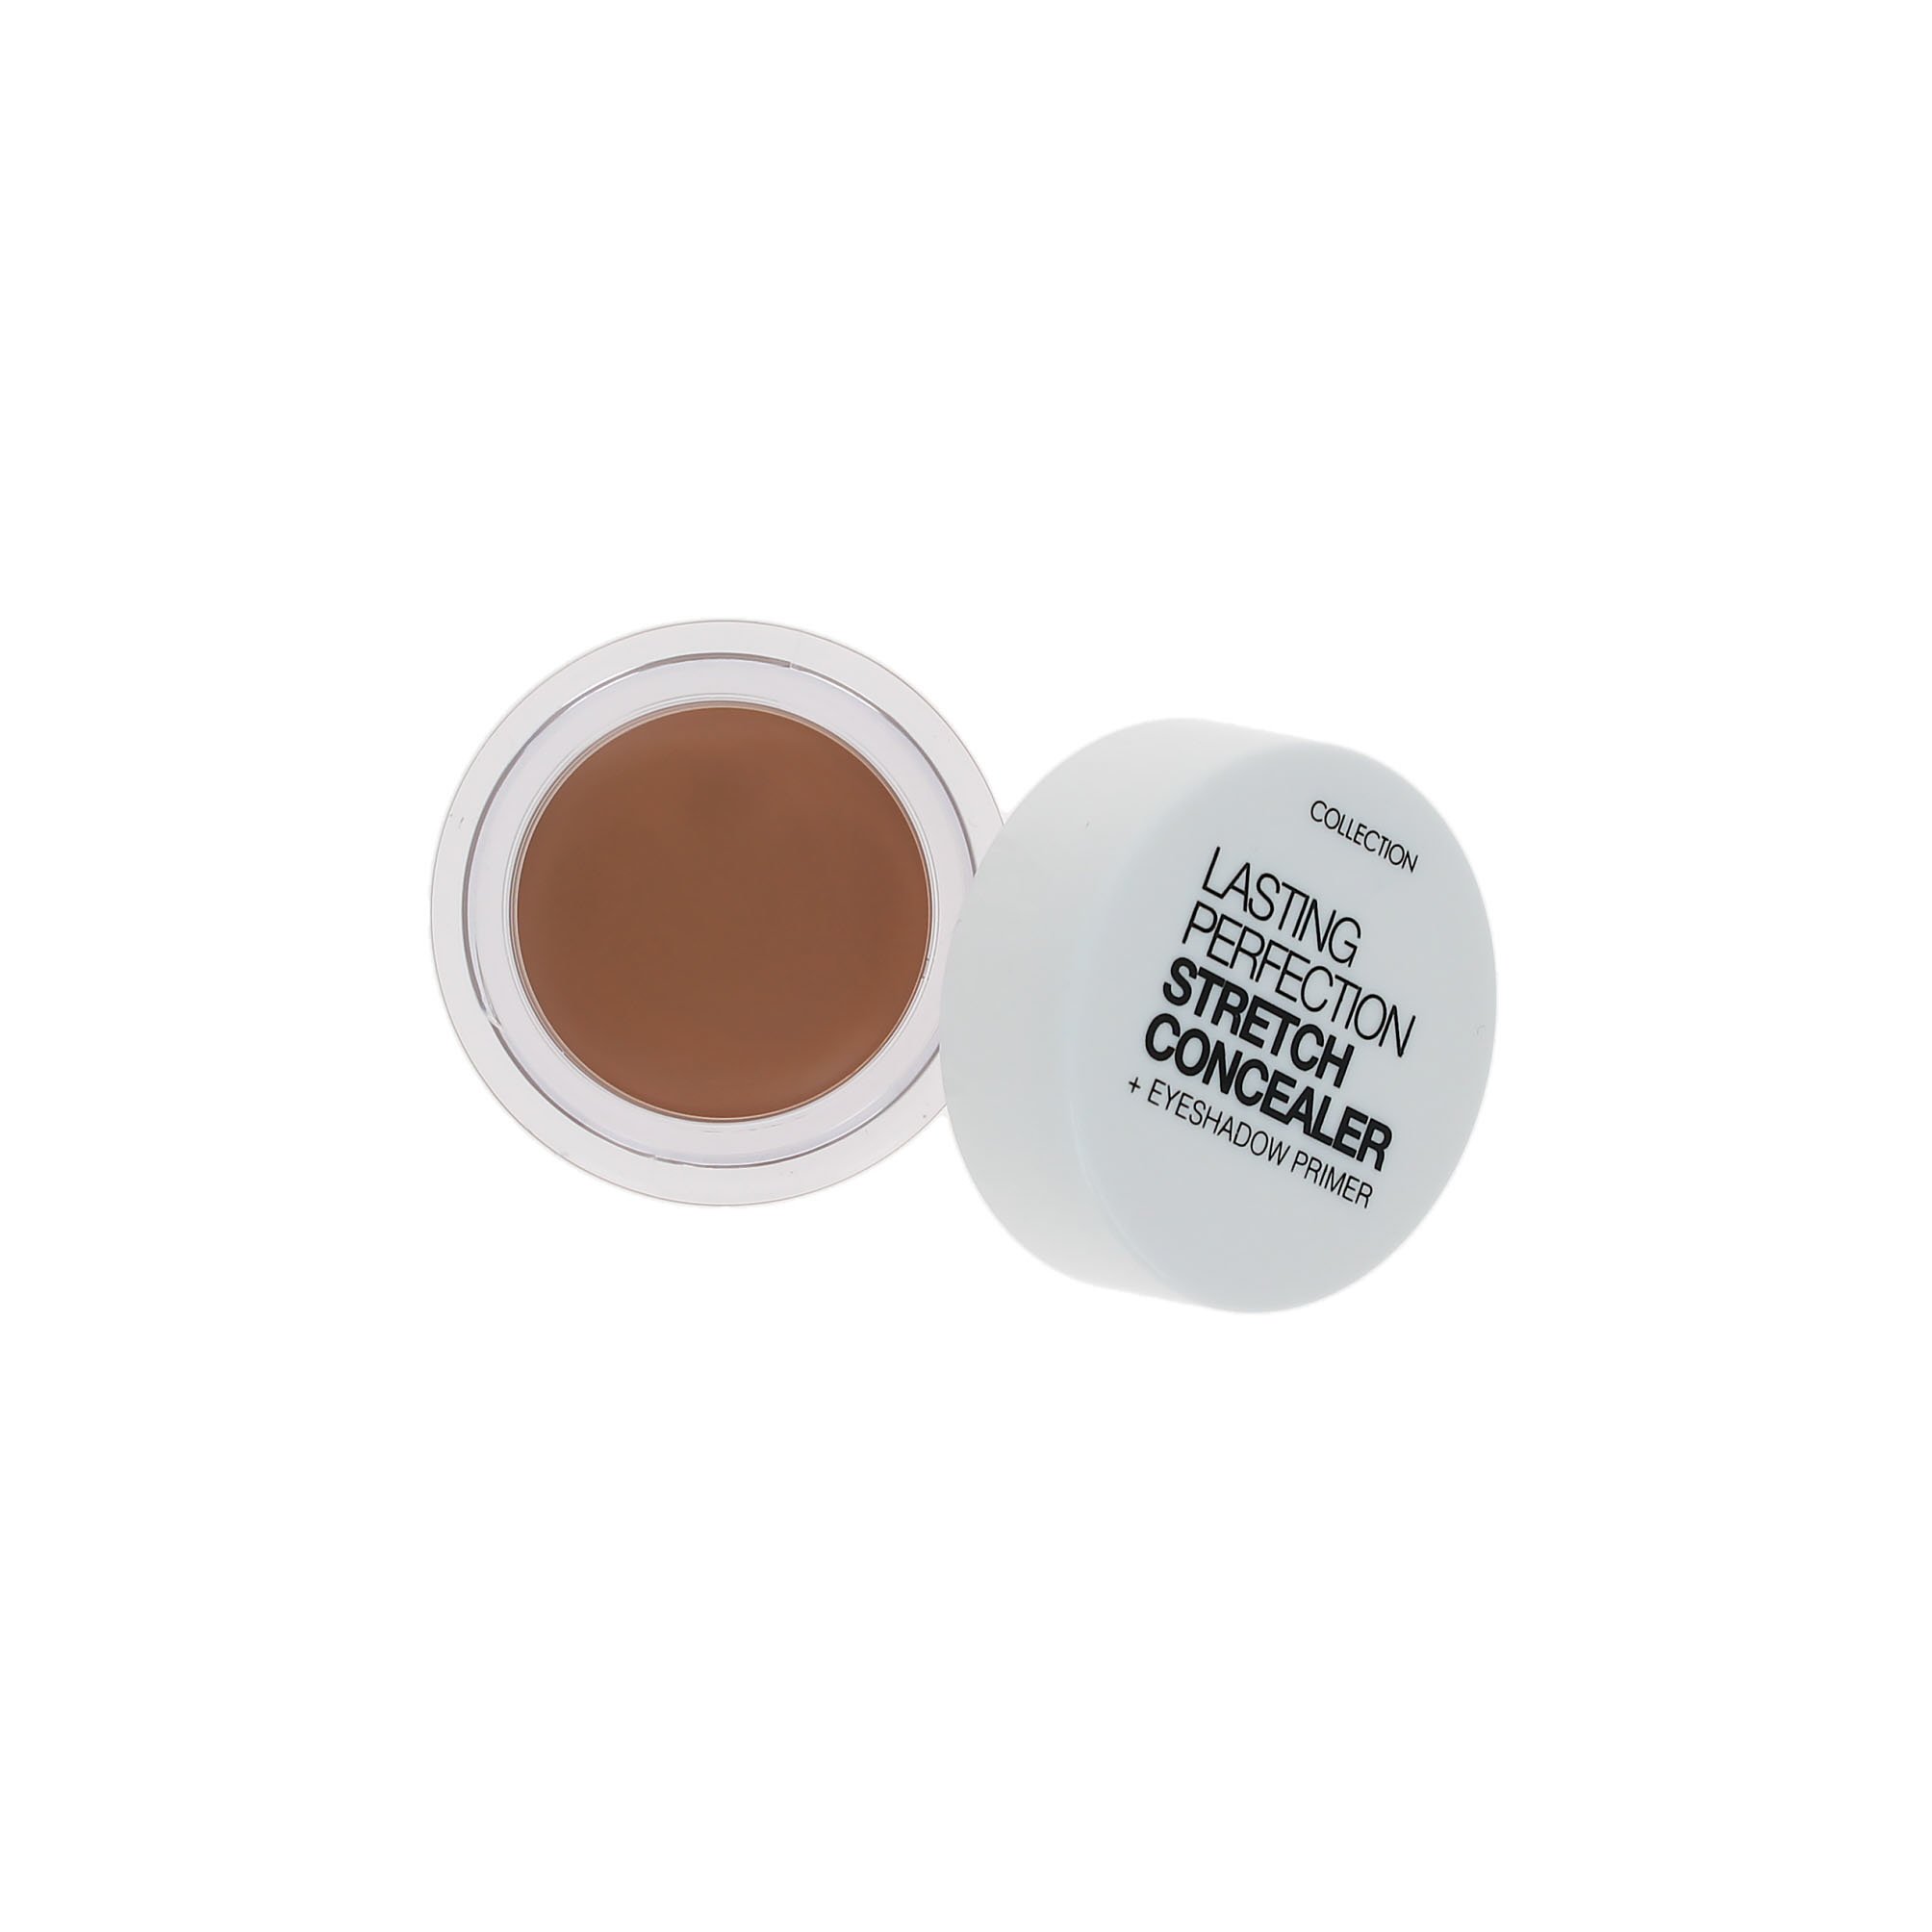 Collection Lasting Perfection Stretch Concealer + Eyeshadow Primer - 13 Praline